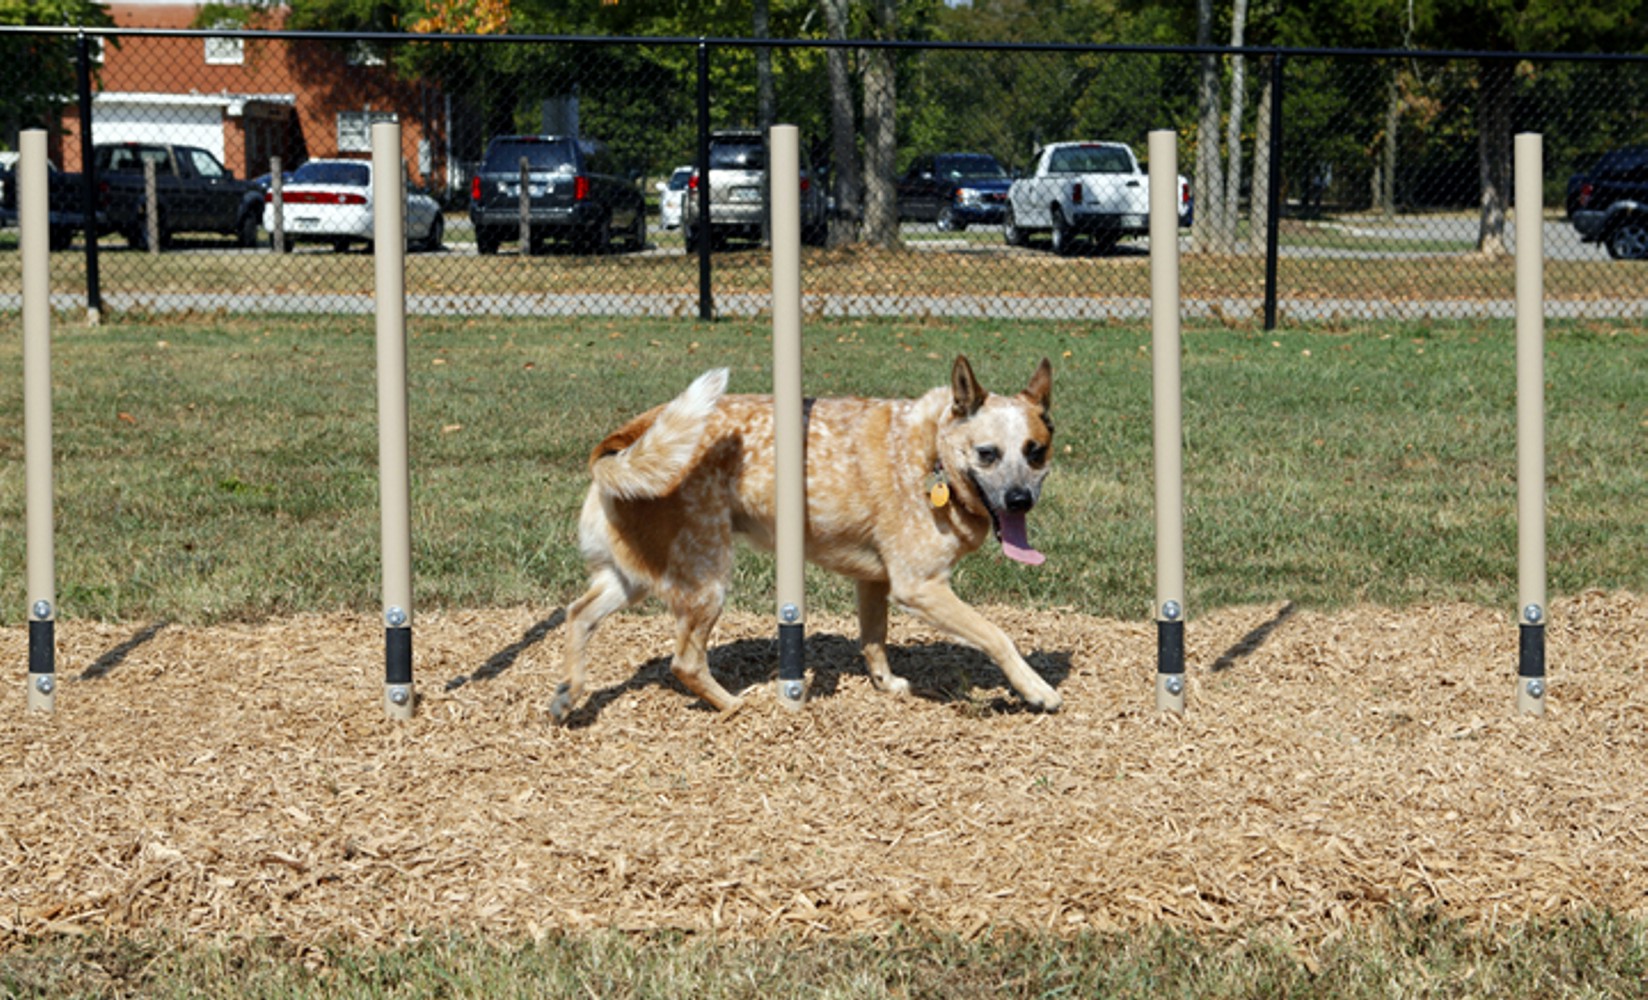 Weave Posts - Dog Park Equipment - All People Can Play,